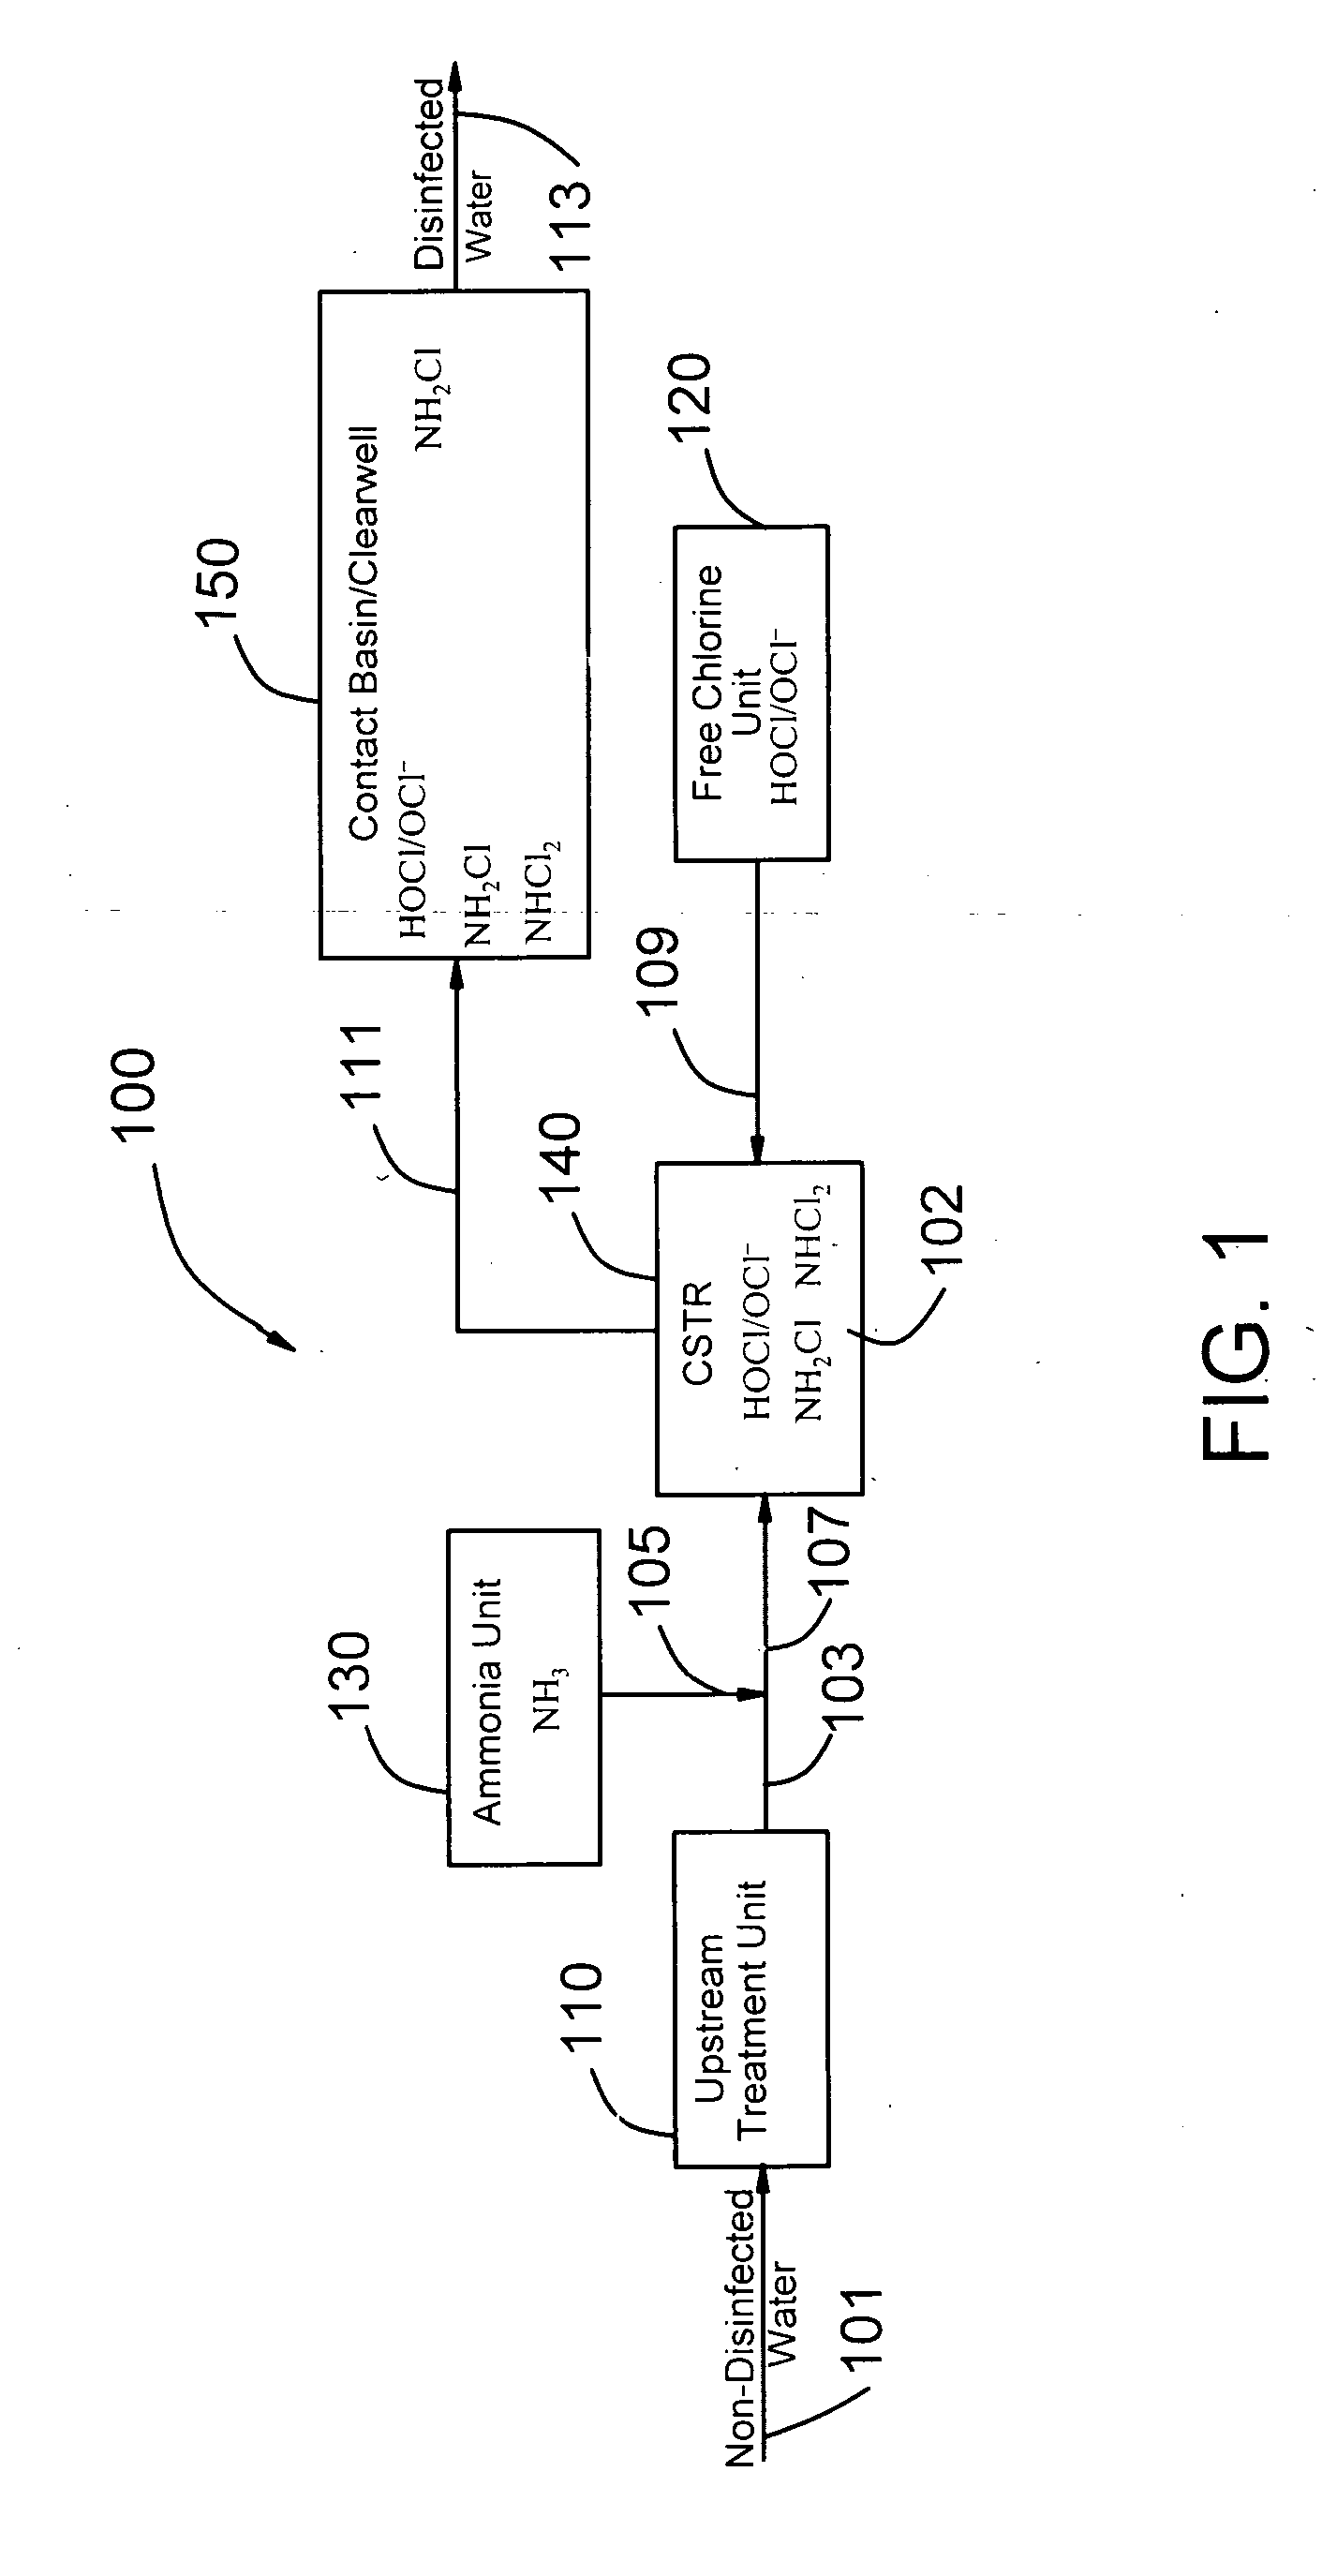 Water disinfection system using simultaneous multiple disinfectants